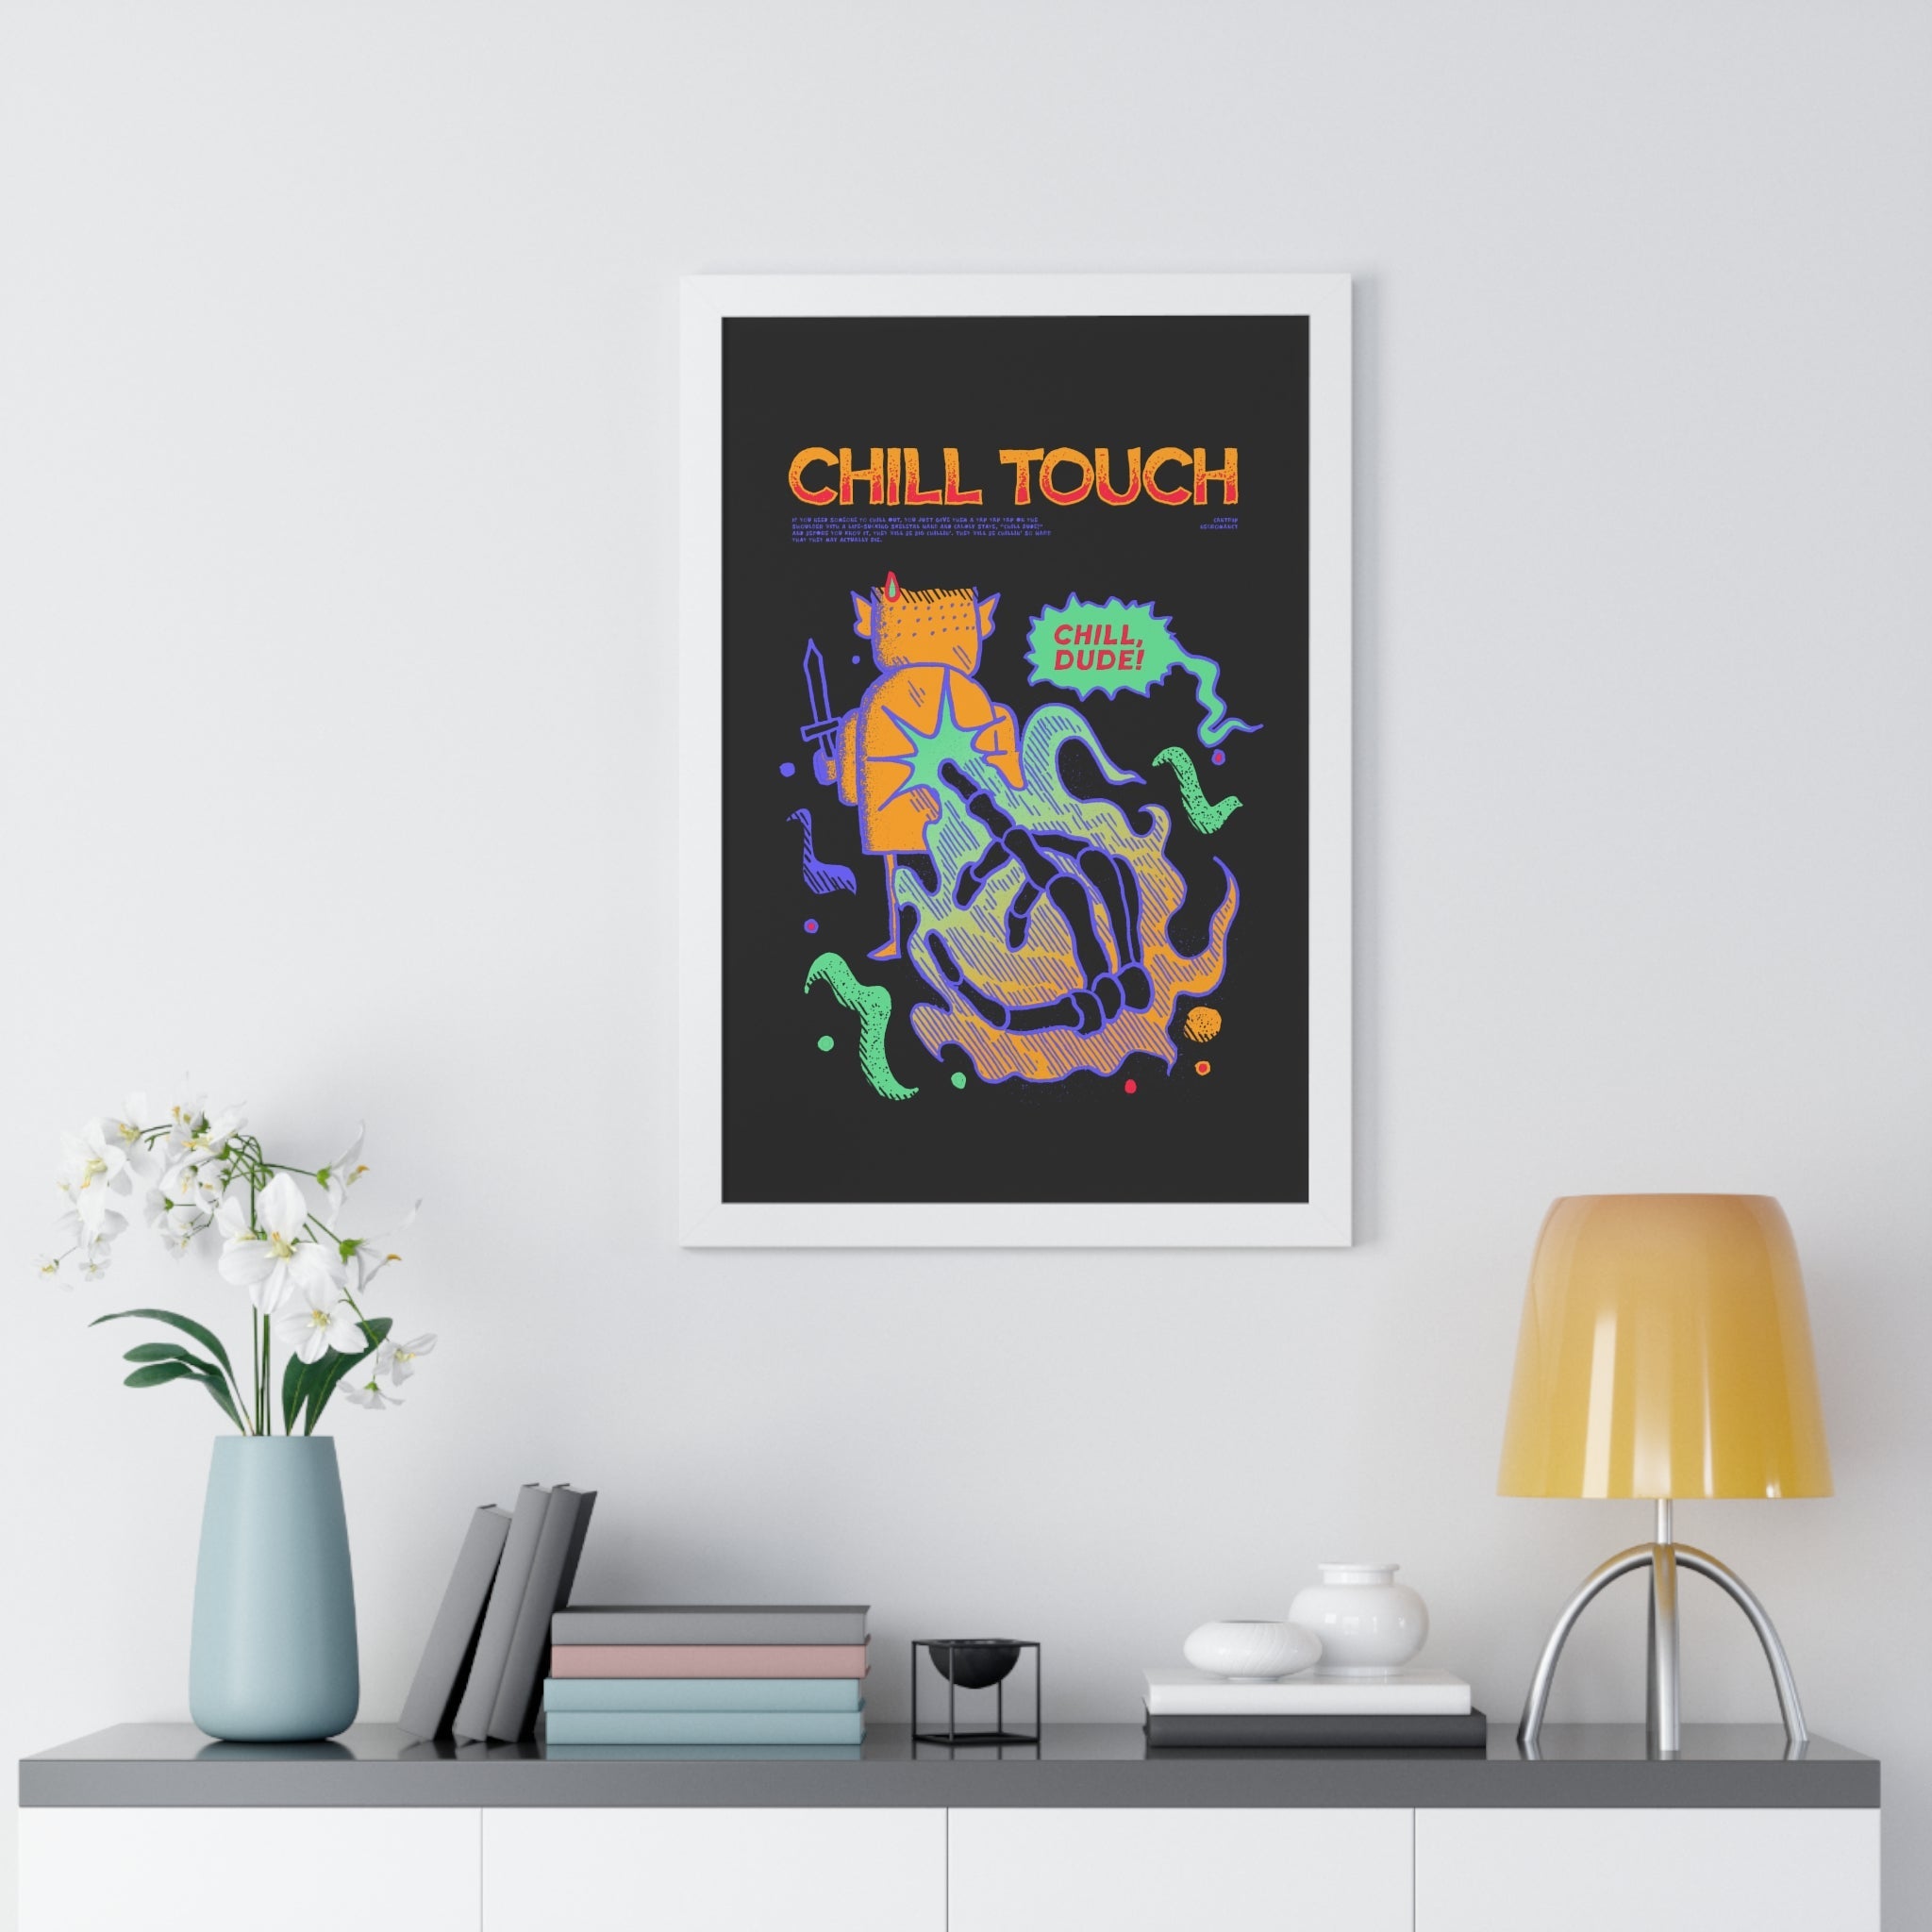 Chill Touch | Framed Poster - Framed Poster - Ace of Gnomes - 28777372255747750396